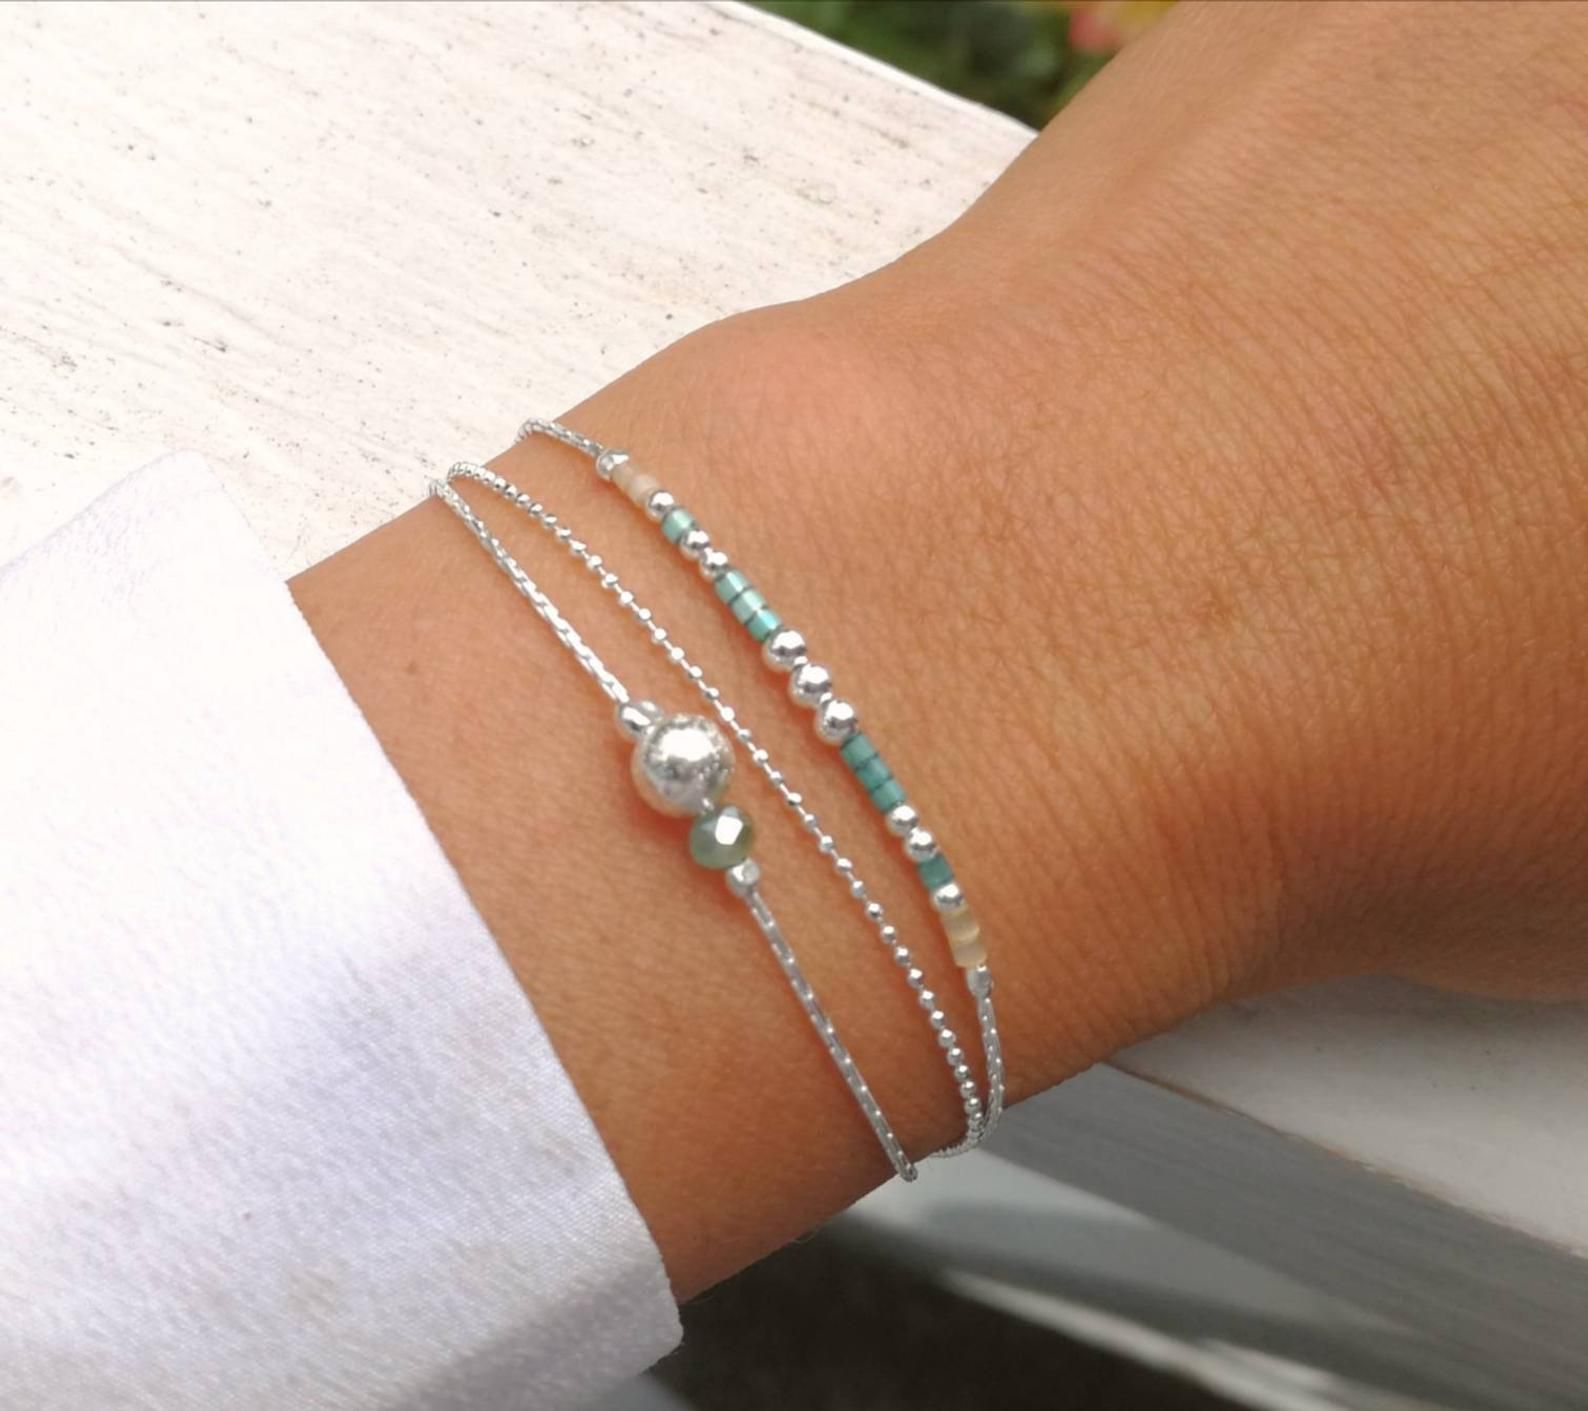 Stunning Silver Bead Bracelets to Add to
Your Collection